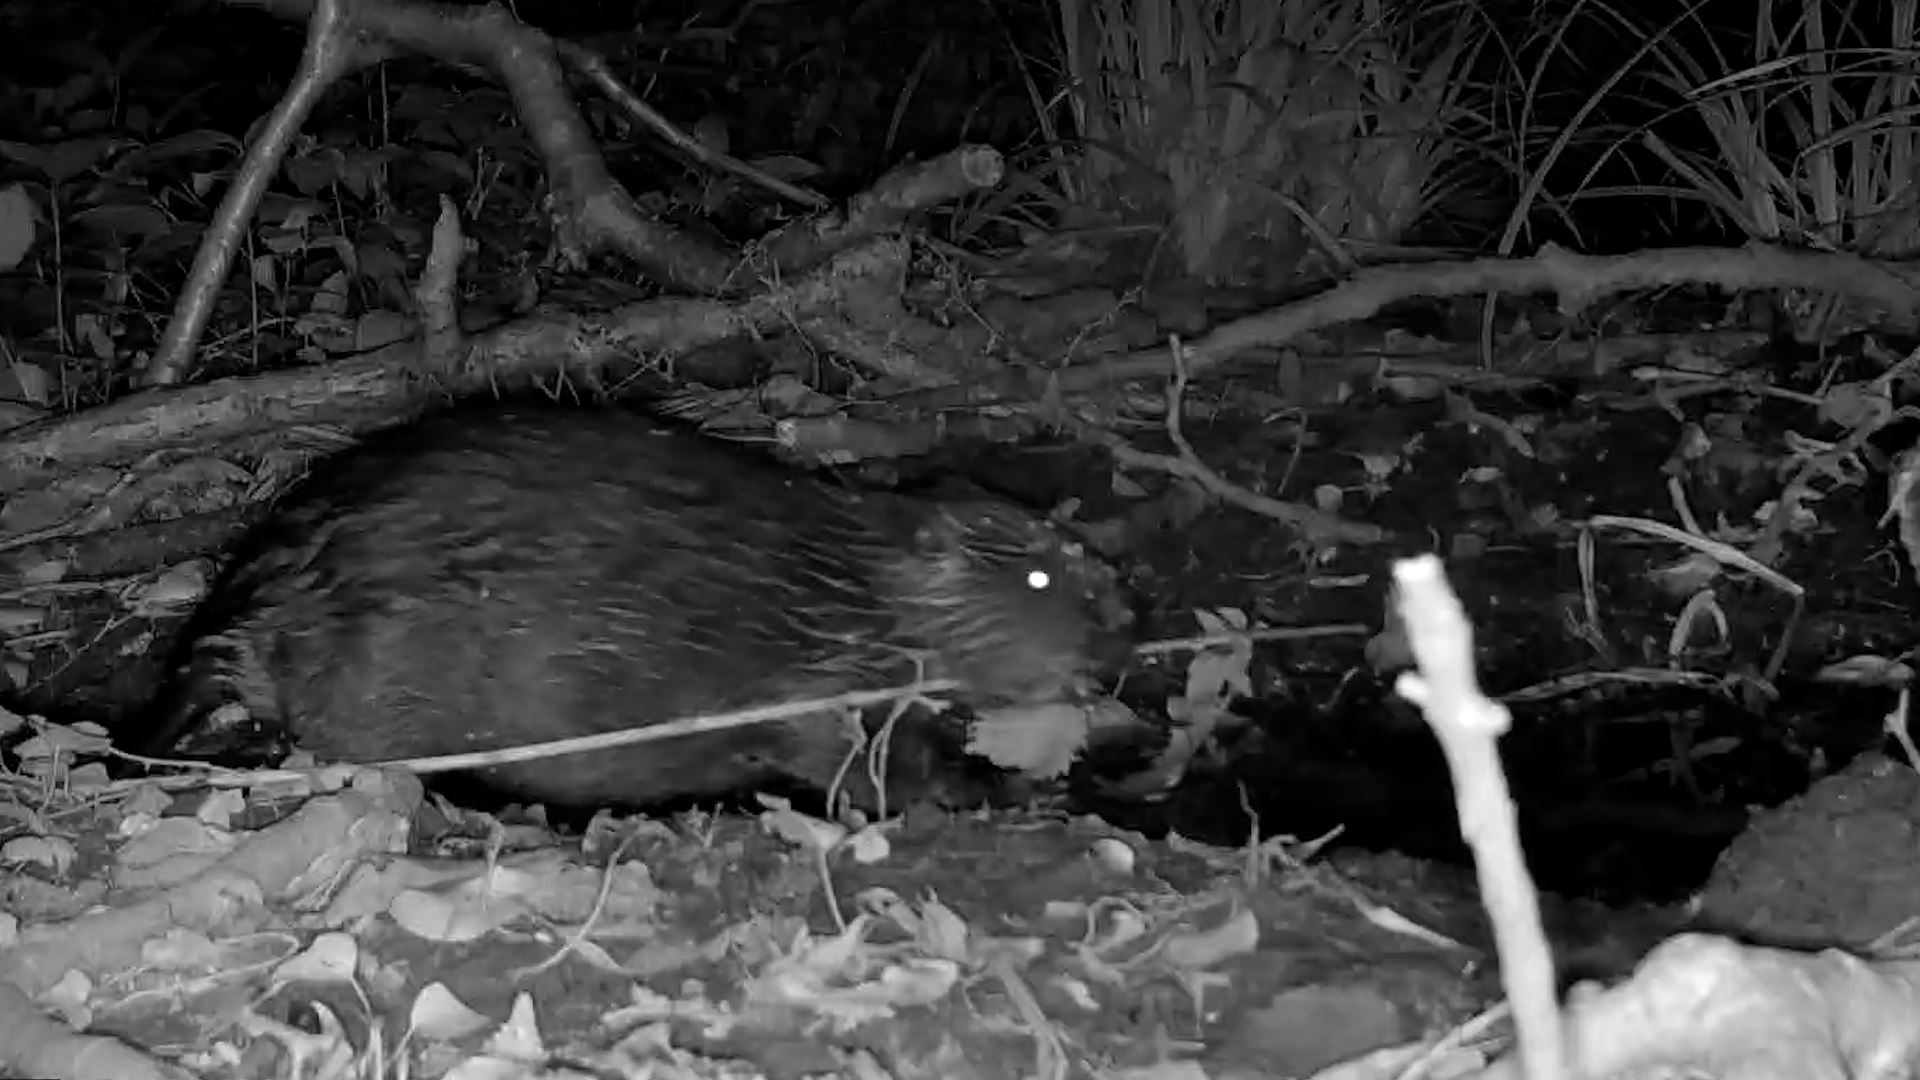 One of the beaver kits dragging a stick (National Trust/PA)